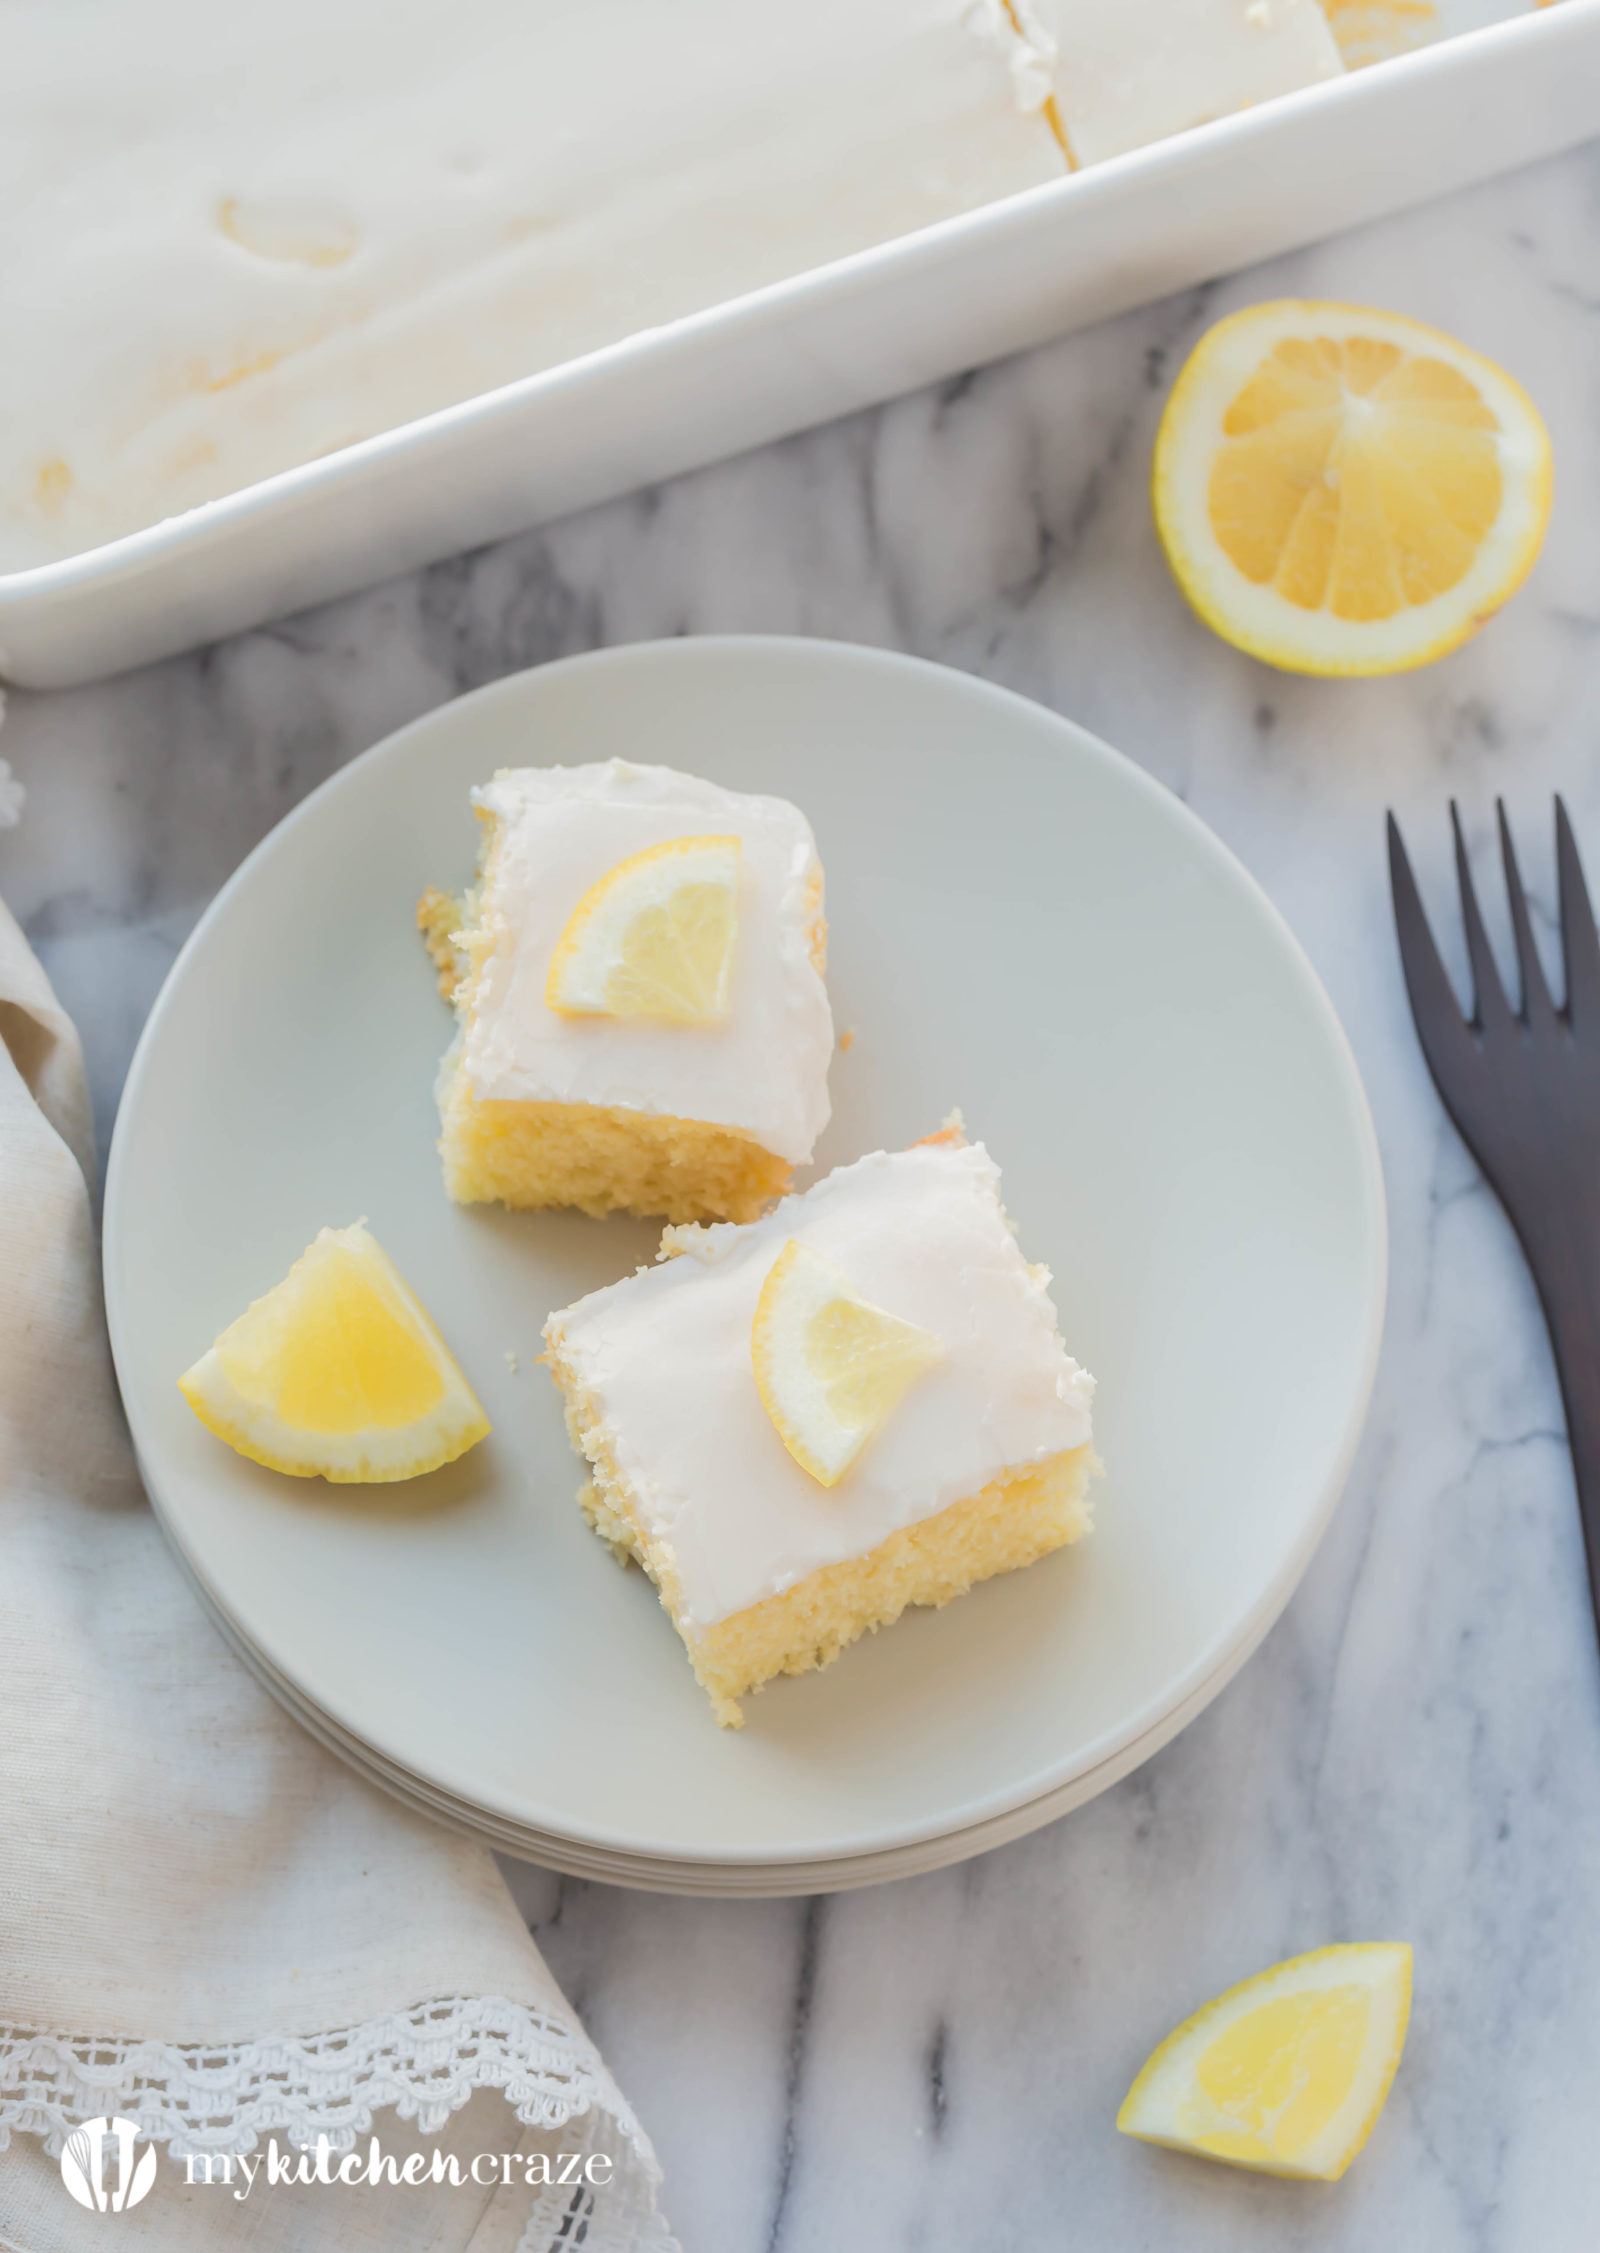 Lemon Velvet Squares are moist and packed with lemon flavor. Topped with a simple lemon glaze, these are one dessert you won't want to pass up. Includes a how to make video too.